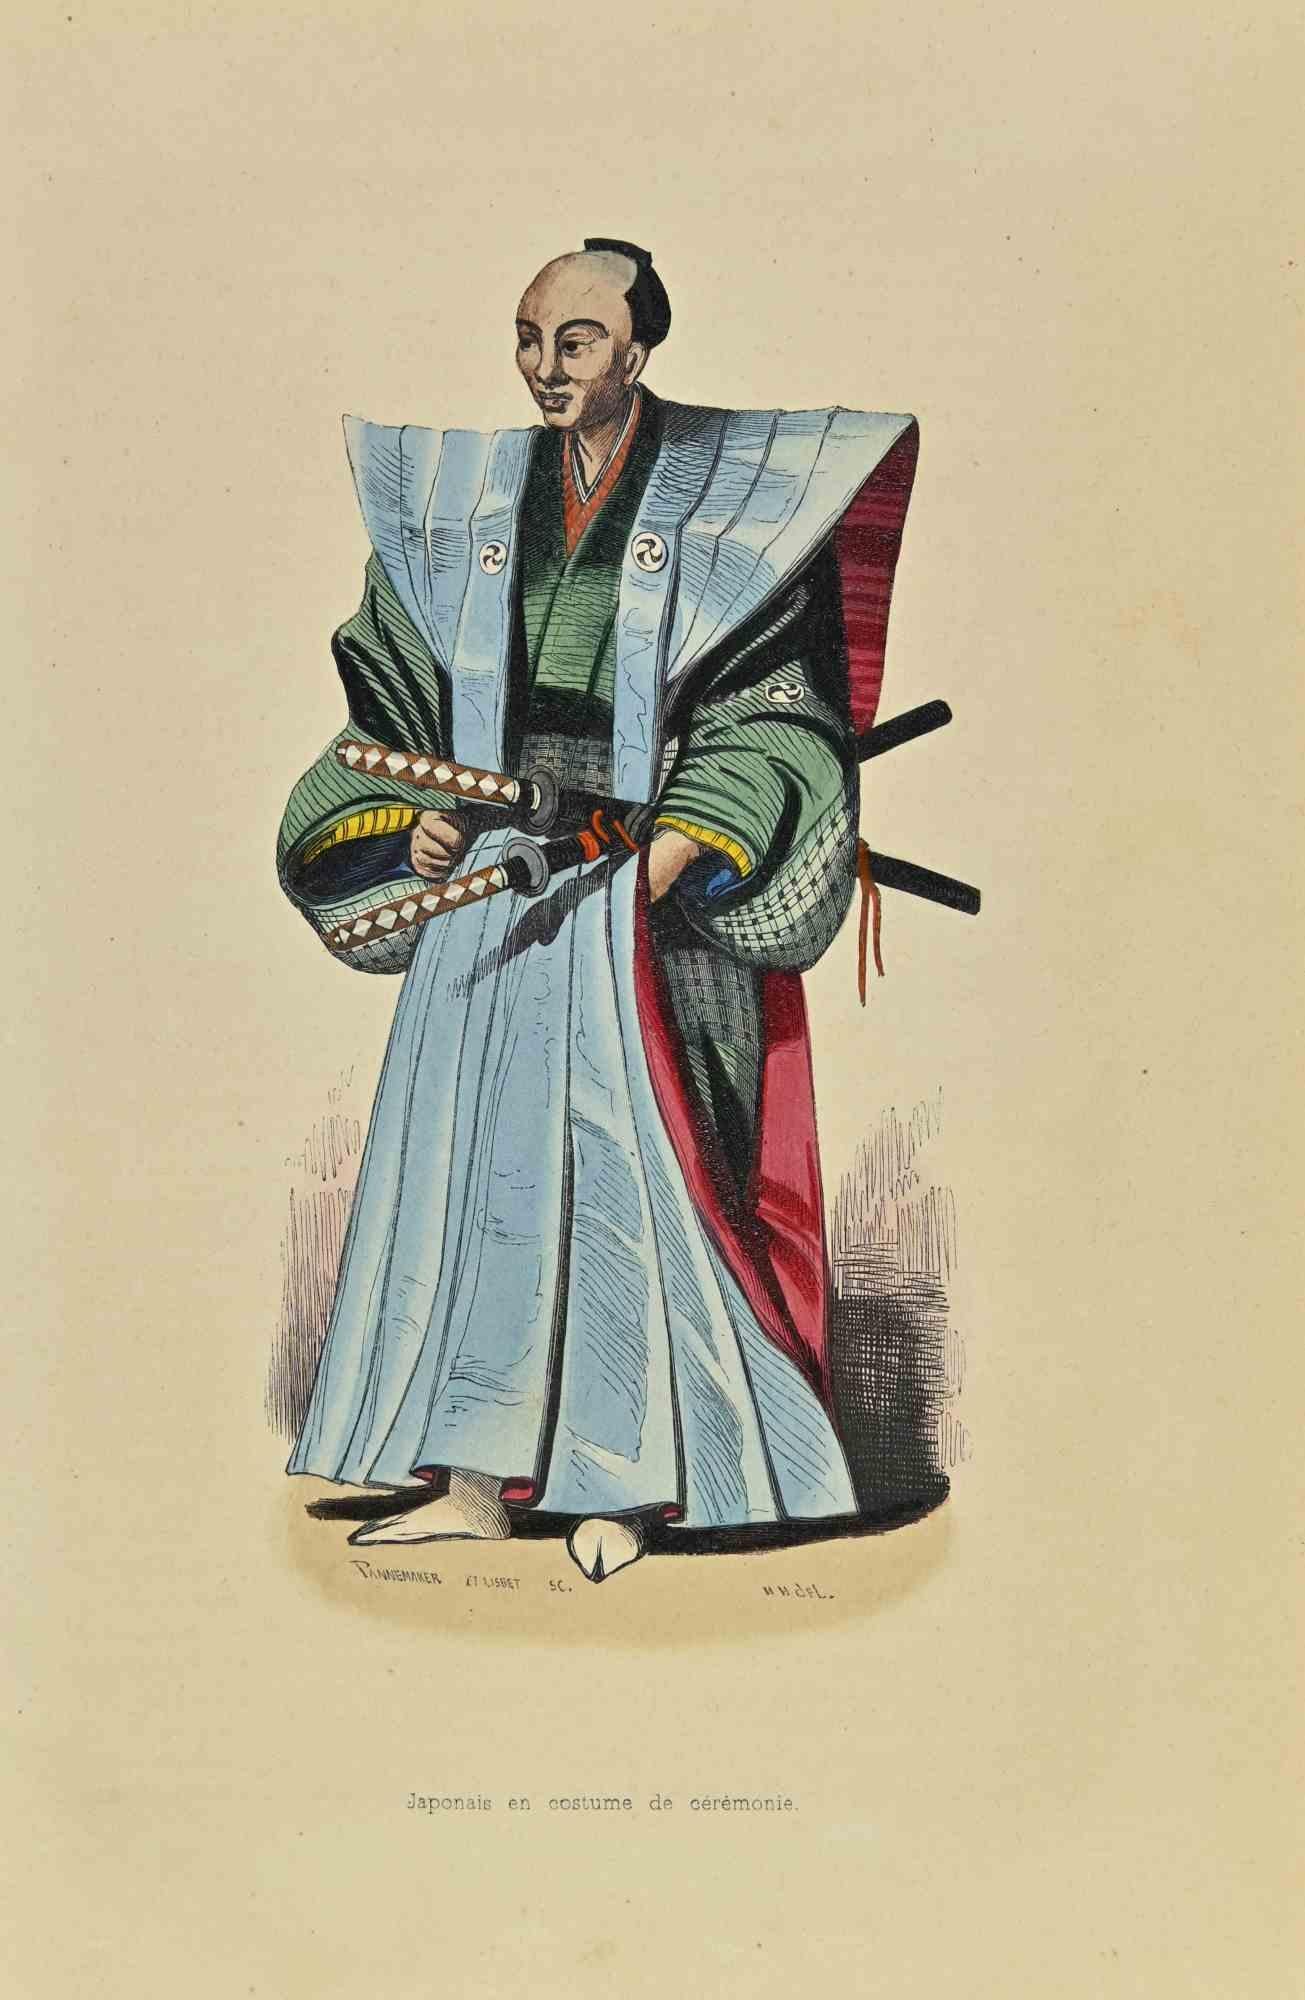 Japanese in Ceremonial Costume is a lithograph made by Auguste Wahlen in 1844.

Hand colored.

Good condition.

At the center of the artwork is the original title "Japonais en costume de ceremonie".

The work is part of Suite Moeurs, usages et